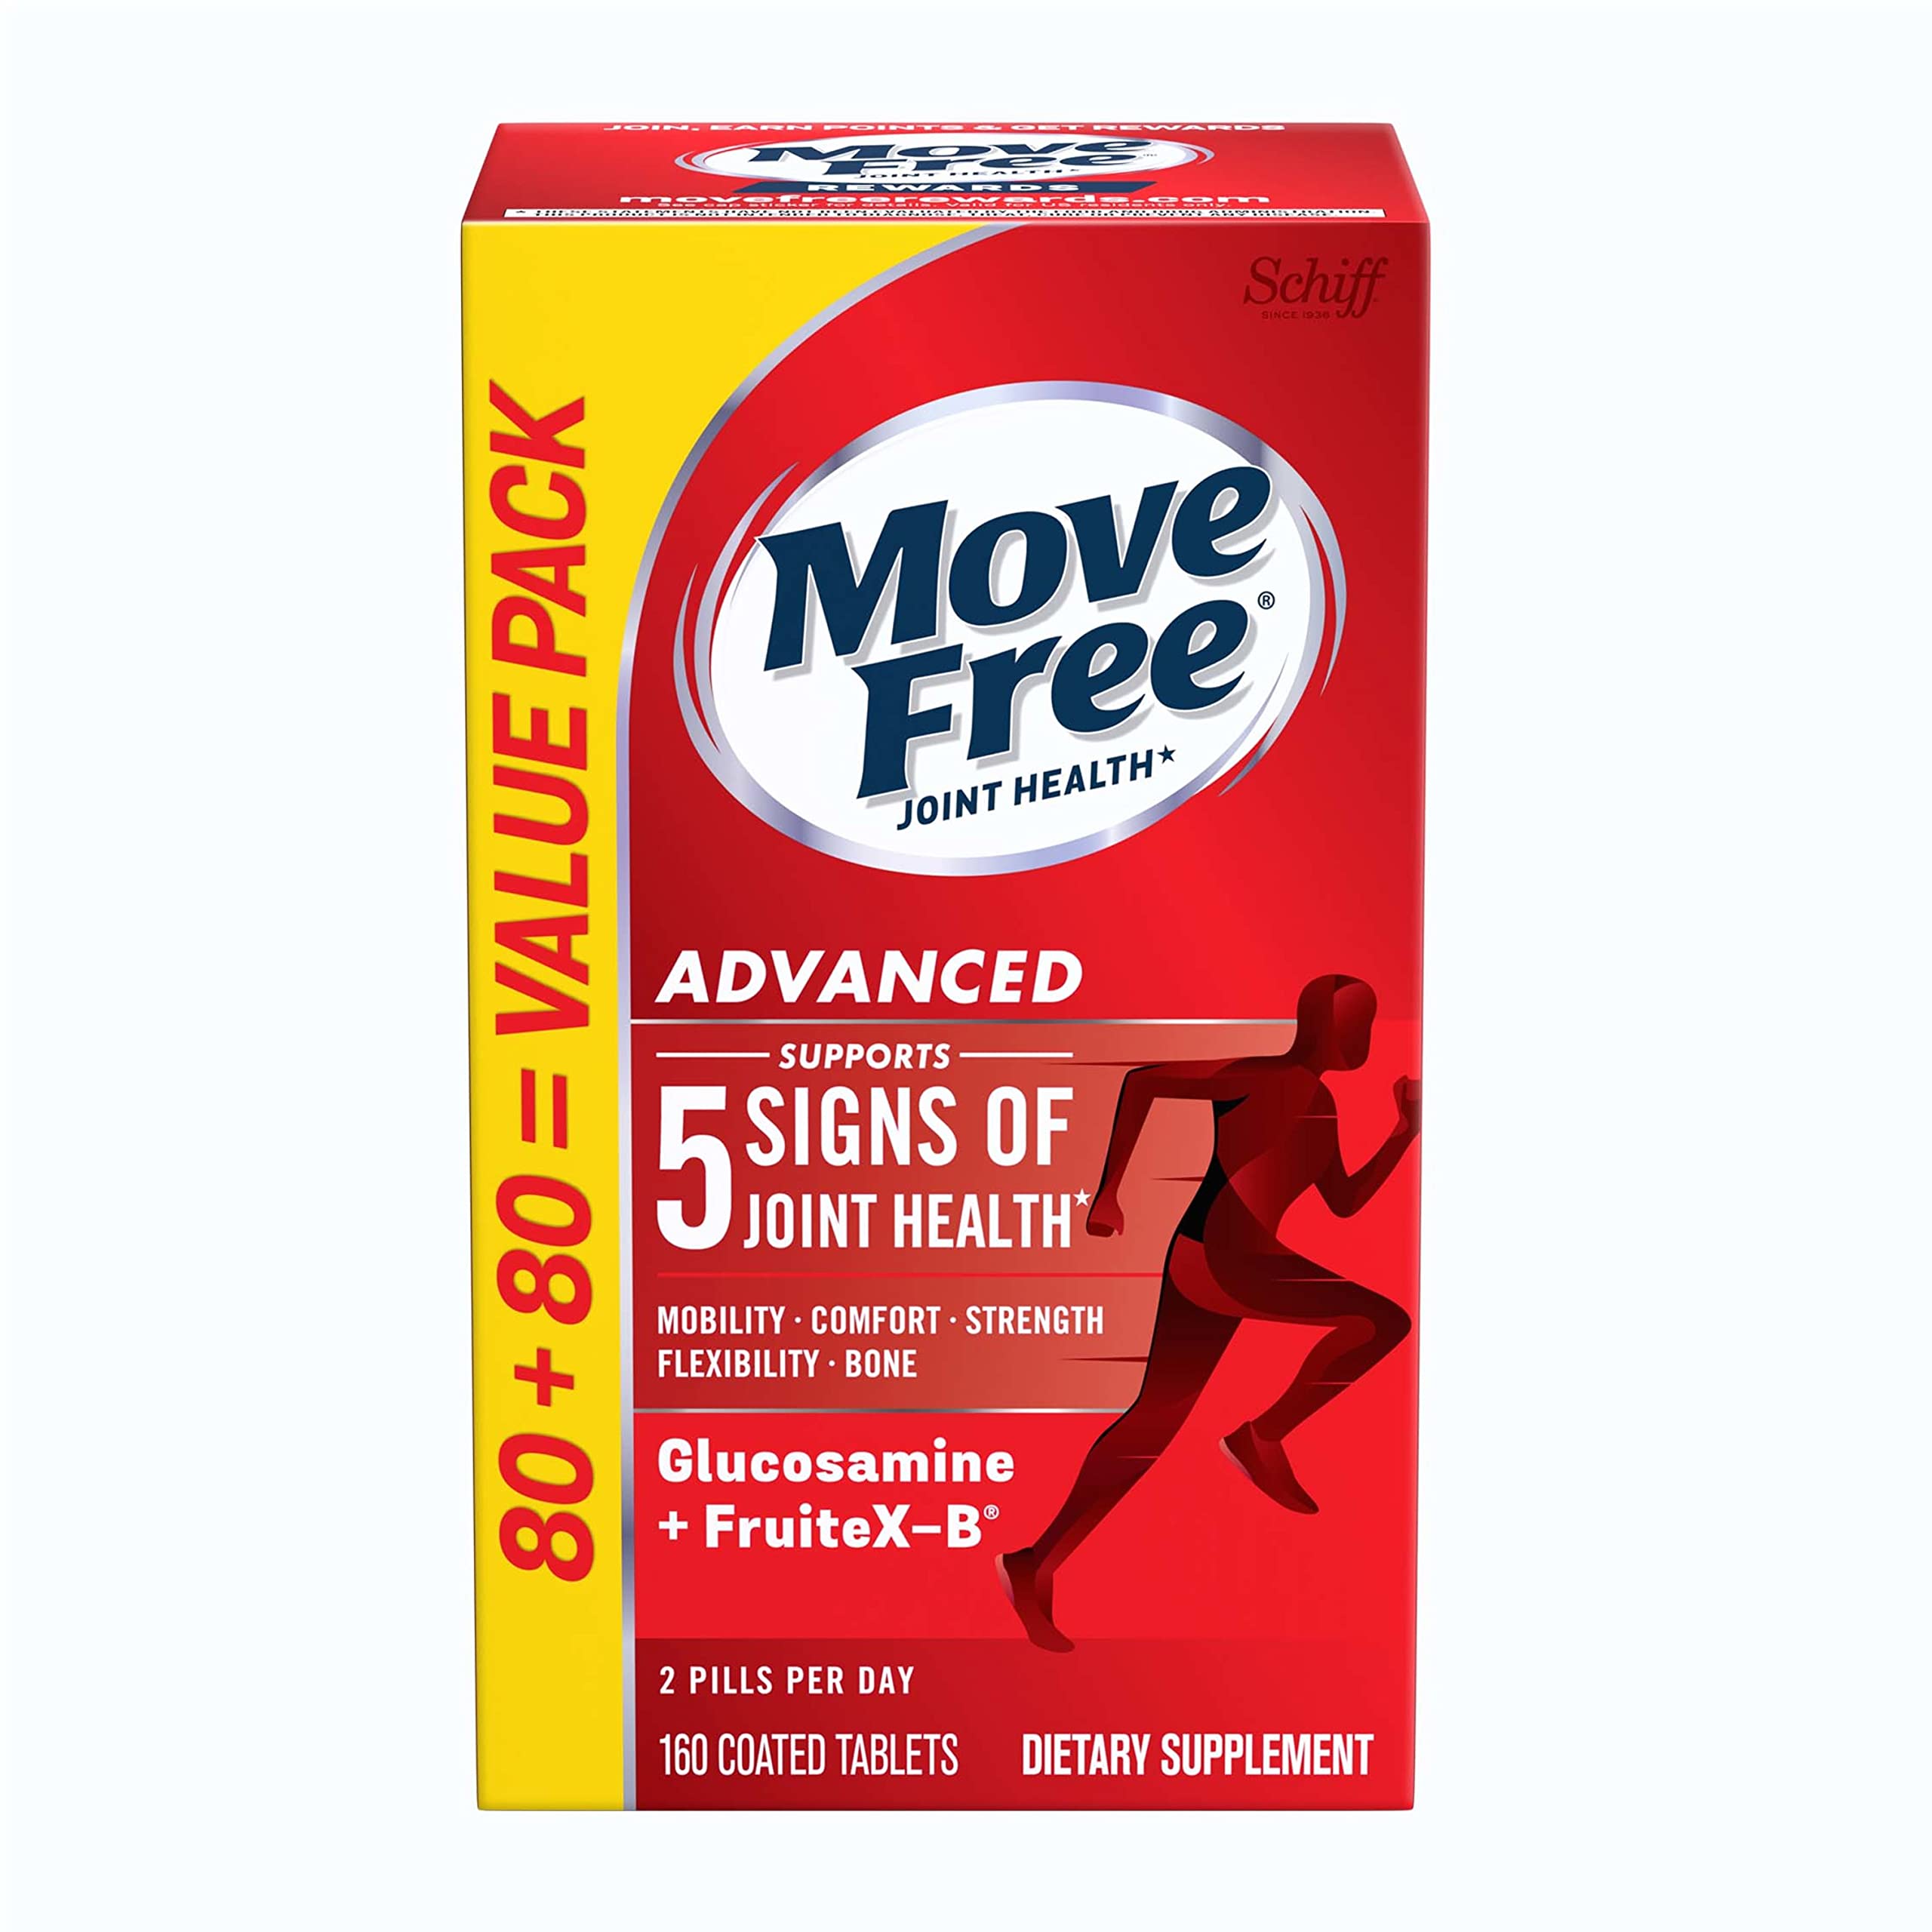 Schiff Move Free Joint Health Advanced (Glucosamine + Chondroitin) - 200  Coated Tablets - Dietary Supplement